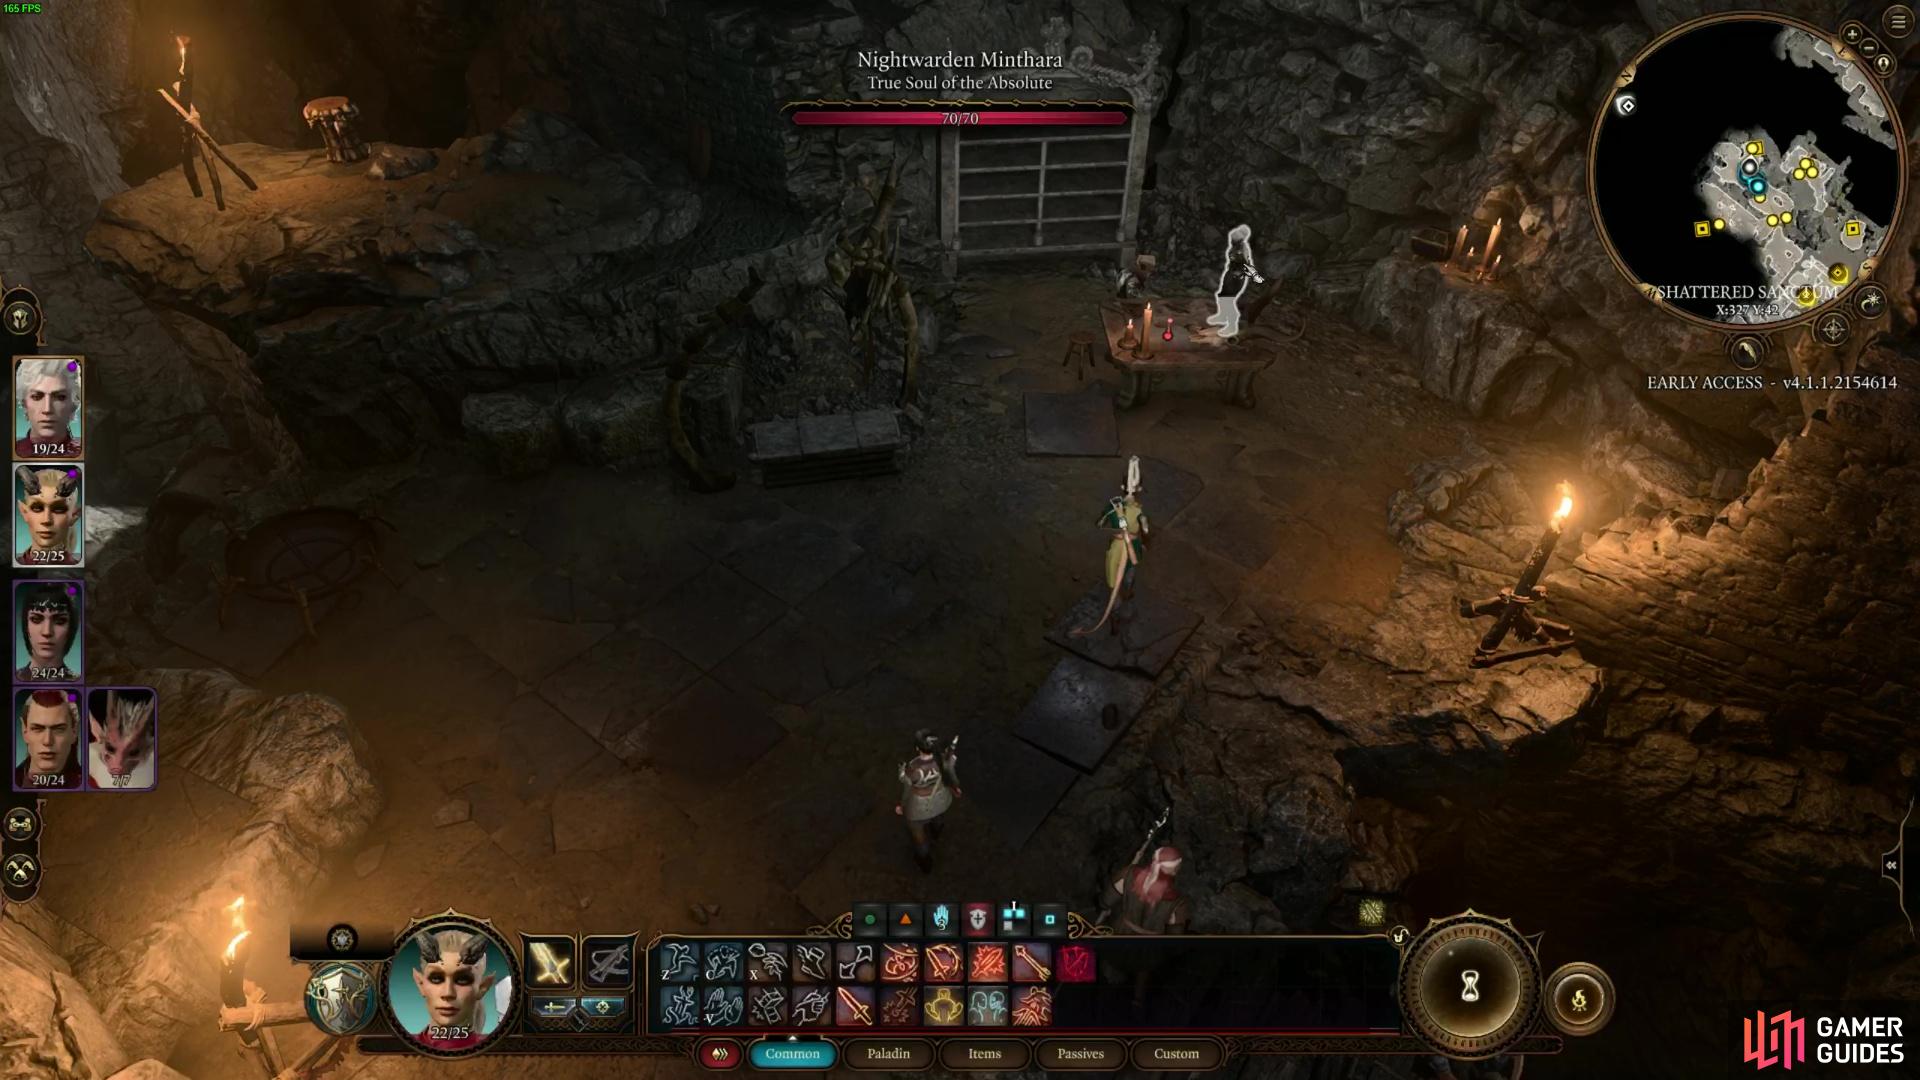 Minthara’s location in Baldur’s Gate 3 is right at the edge of the Shattered Sanctum, inside the Goblin Camp.